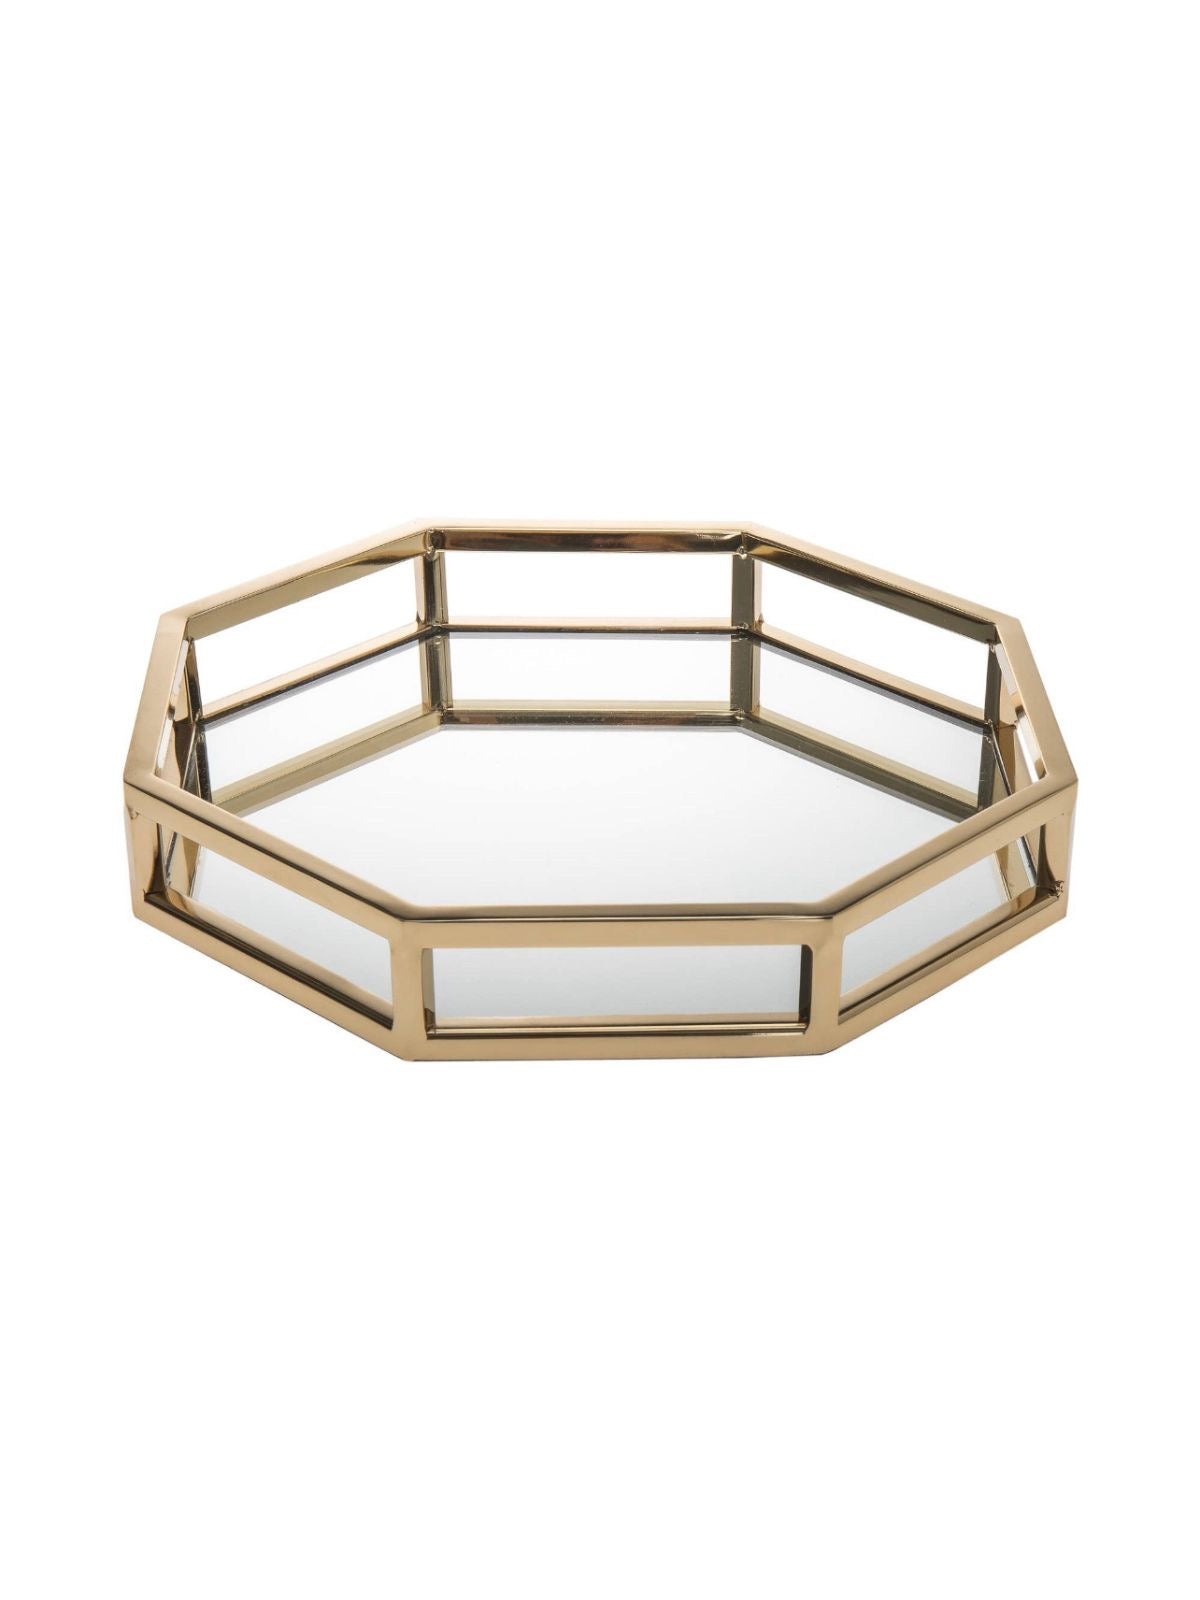 Small Gold Octagon Design Mirrored Decorative Tray for Vanities. 